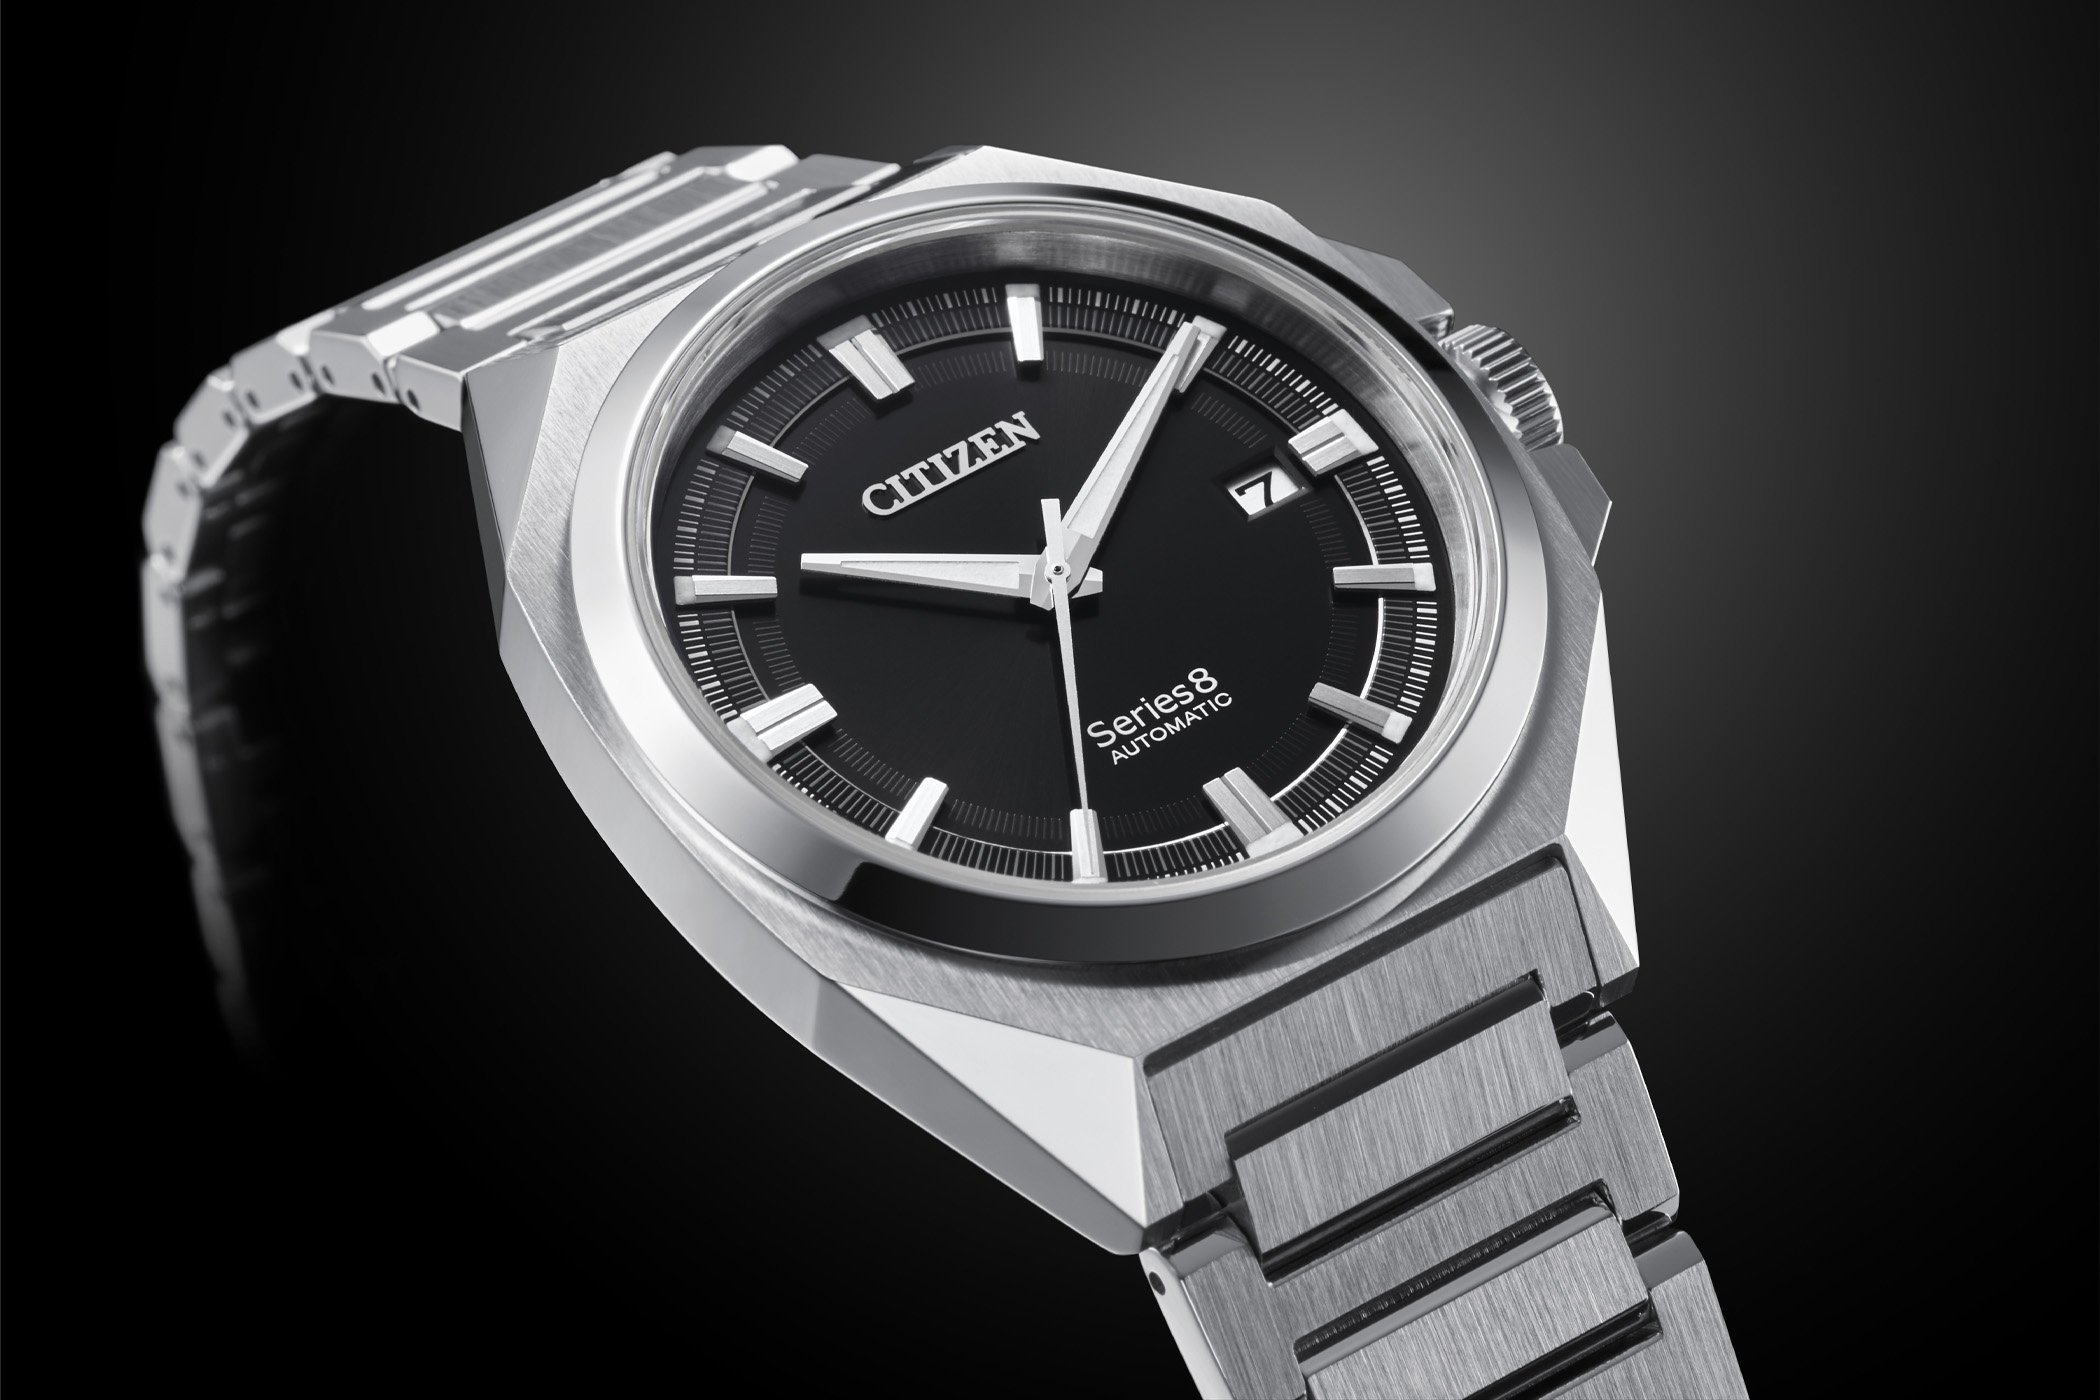 pulse Thorny Permanent Introducing - 2021 Citizen Series 8 of Automatic Sports Watches